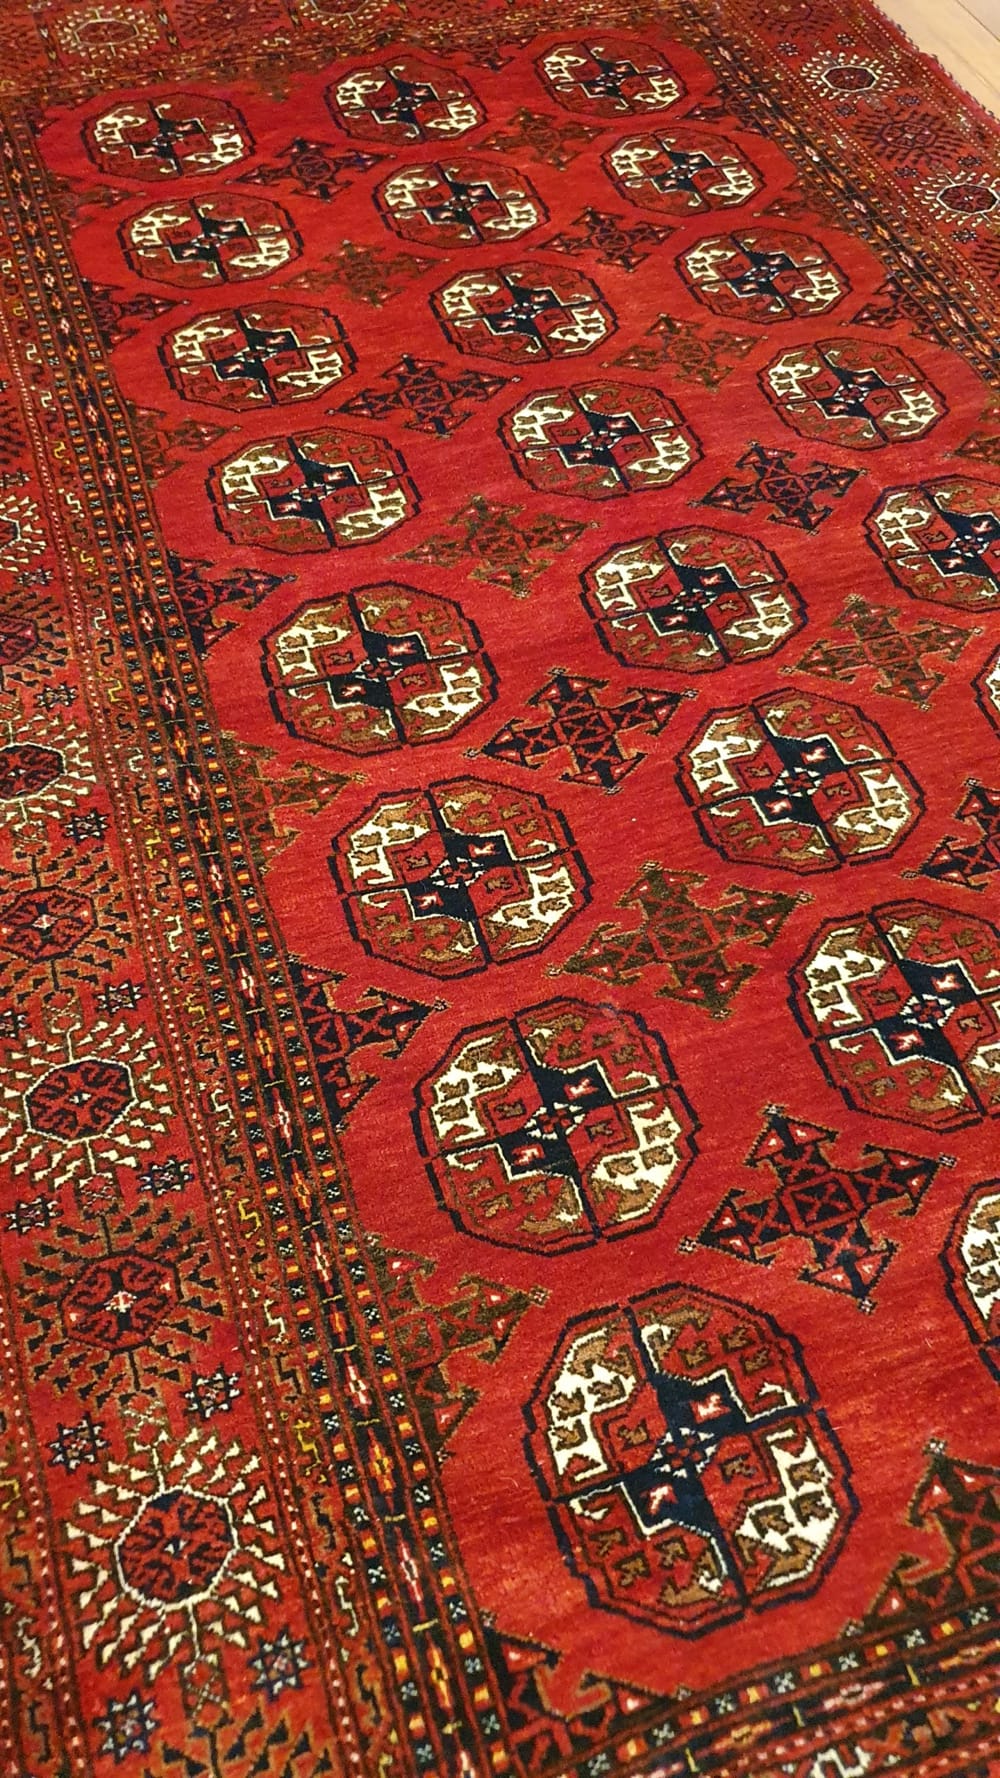 Rug# 7005A, Antique Tekke- Turkaman Early 20th c, collectable, Persia, size 200x110 cm, RRP3500, on special $1500 (4)